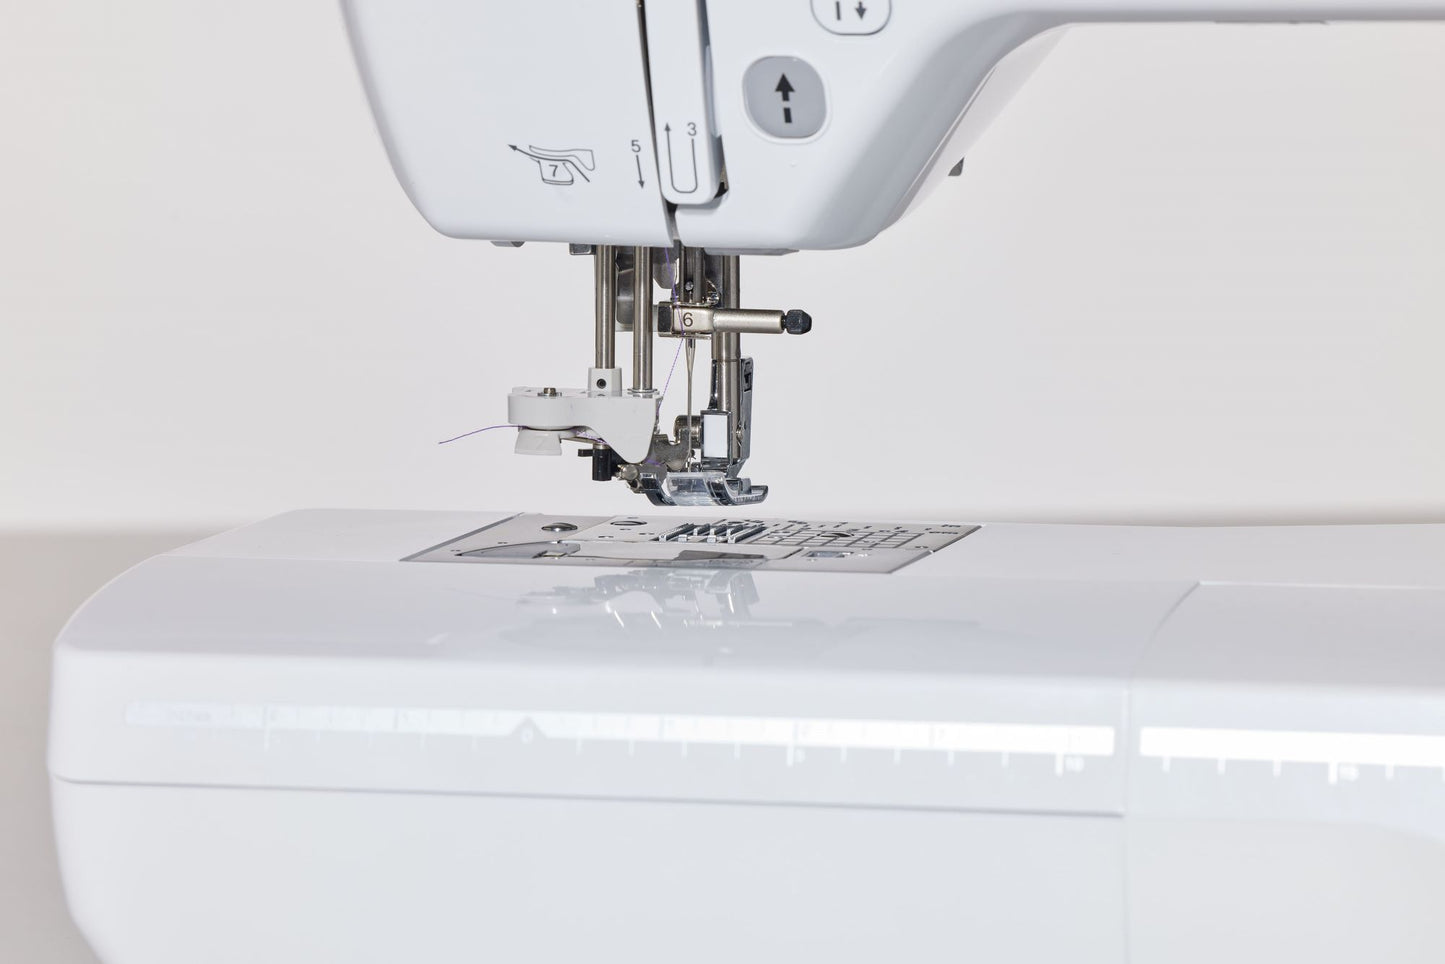 Brother Innovs F560 Sewing Machine